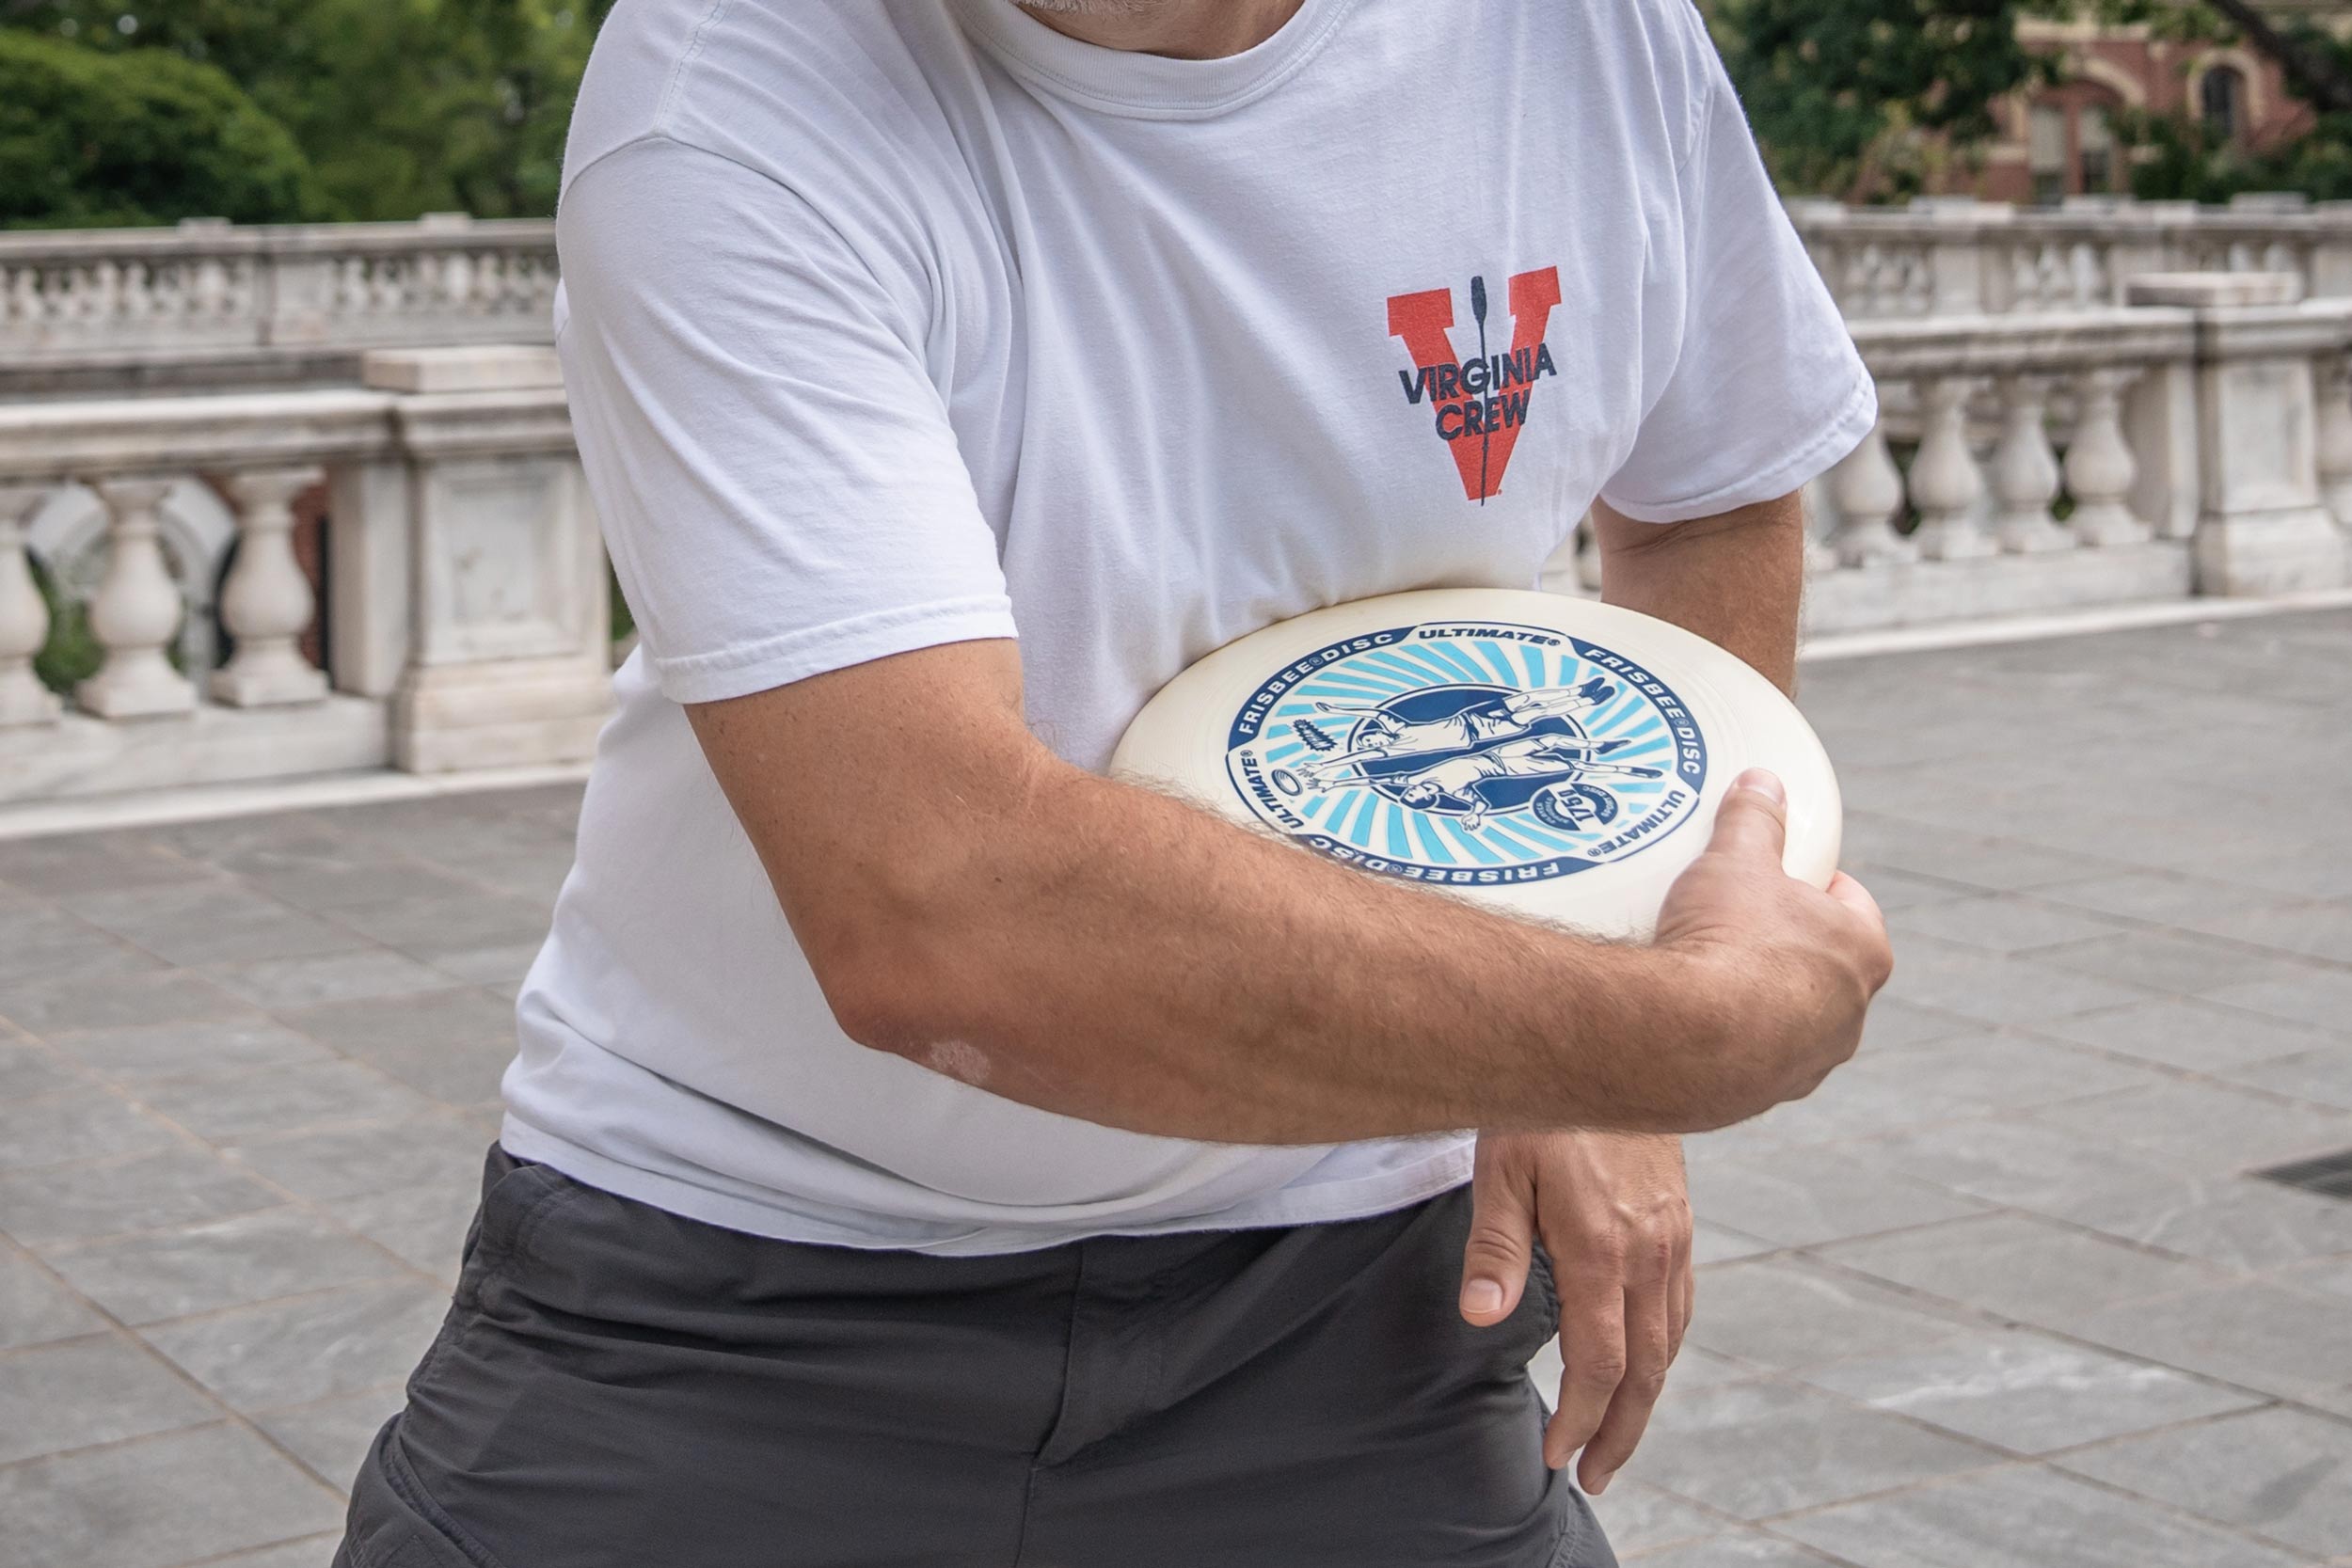 Close up of a man about to throw a frisbee while wearing an old U V A rowing shirt